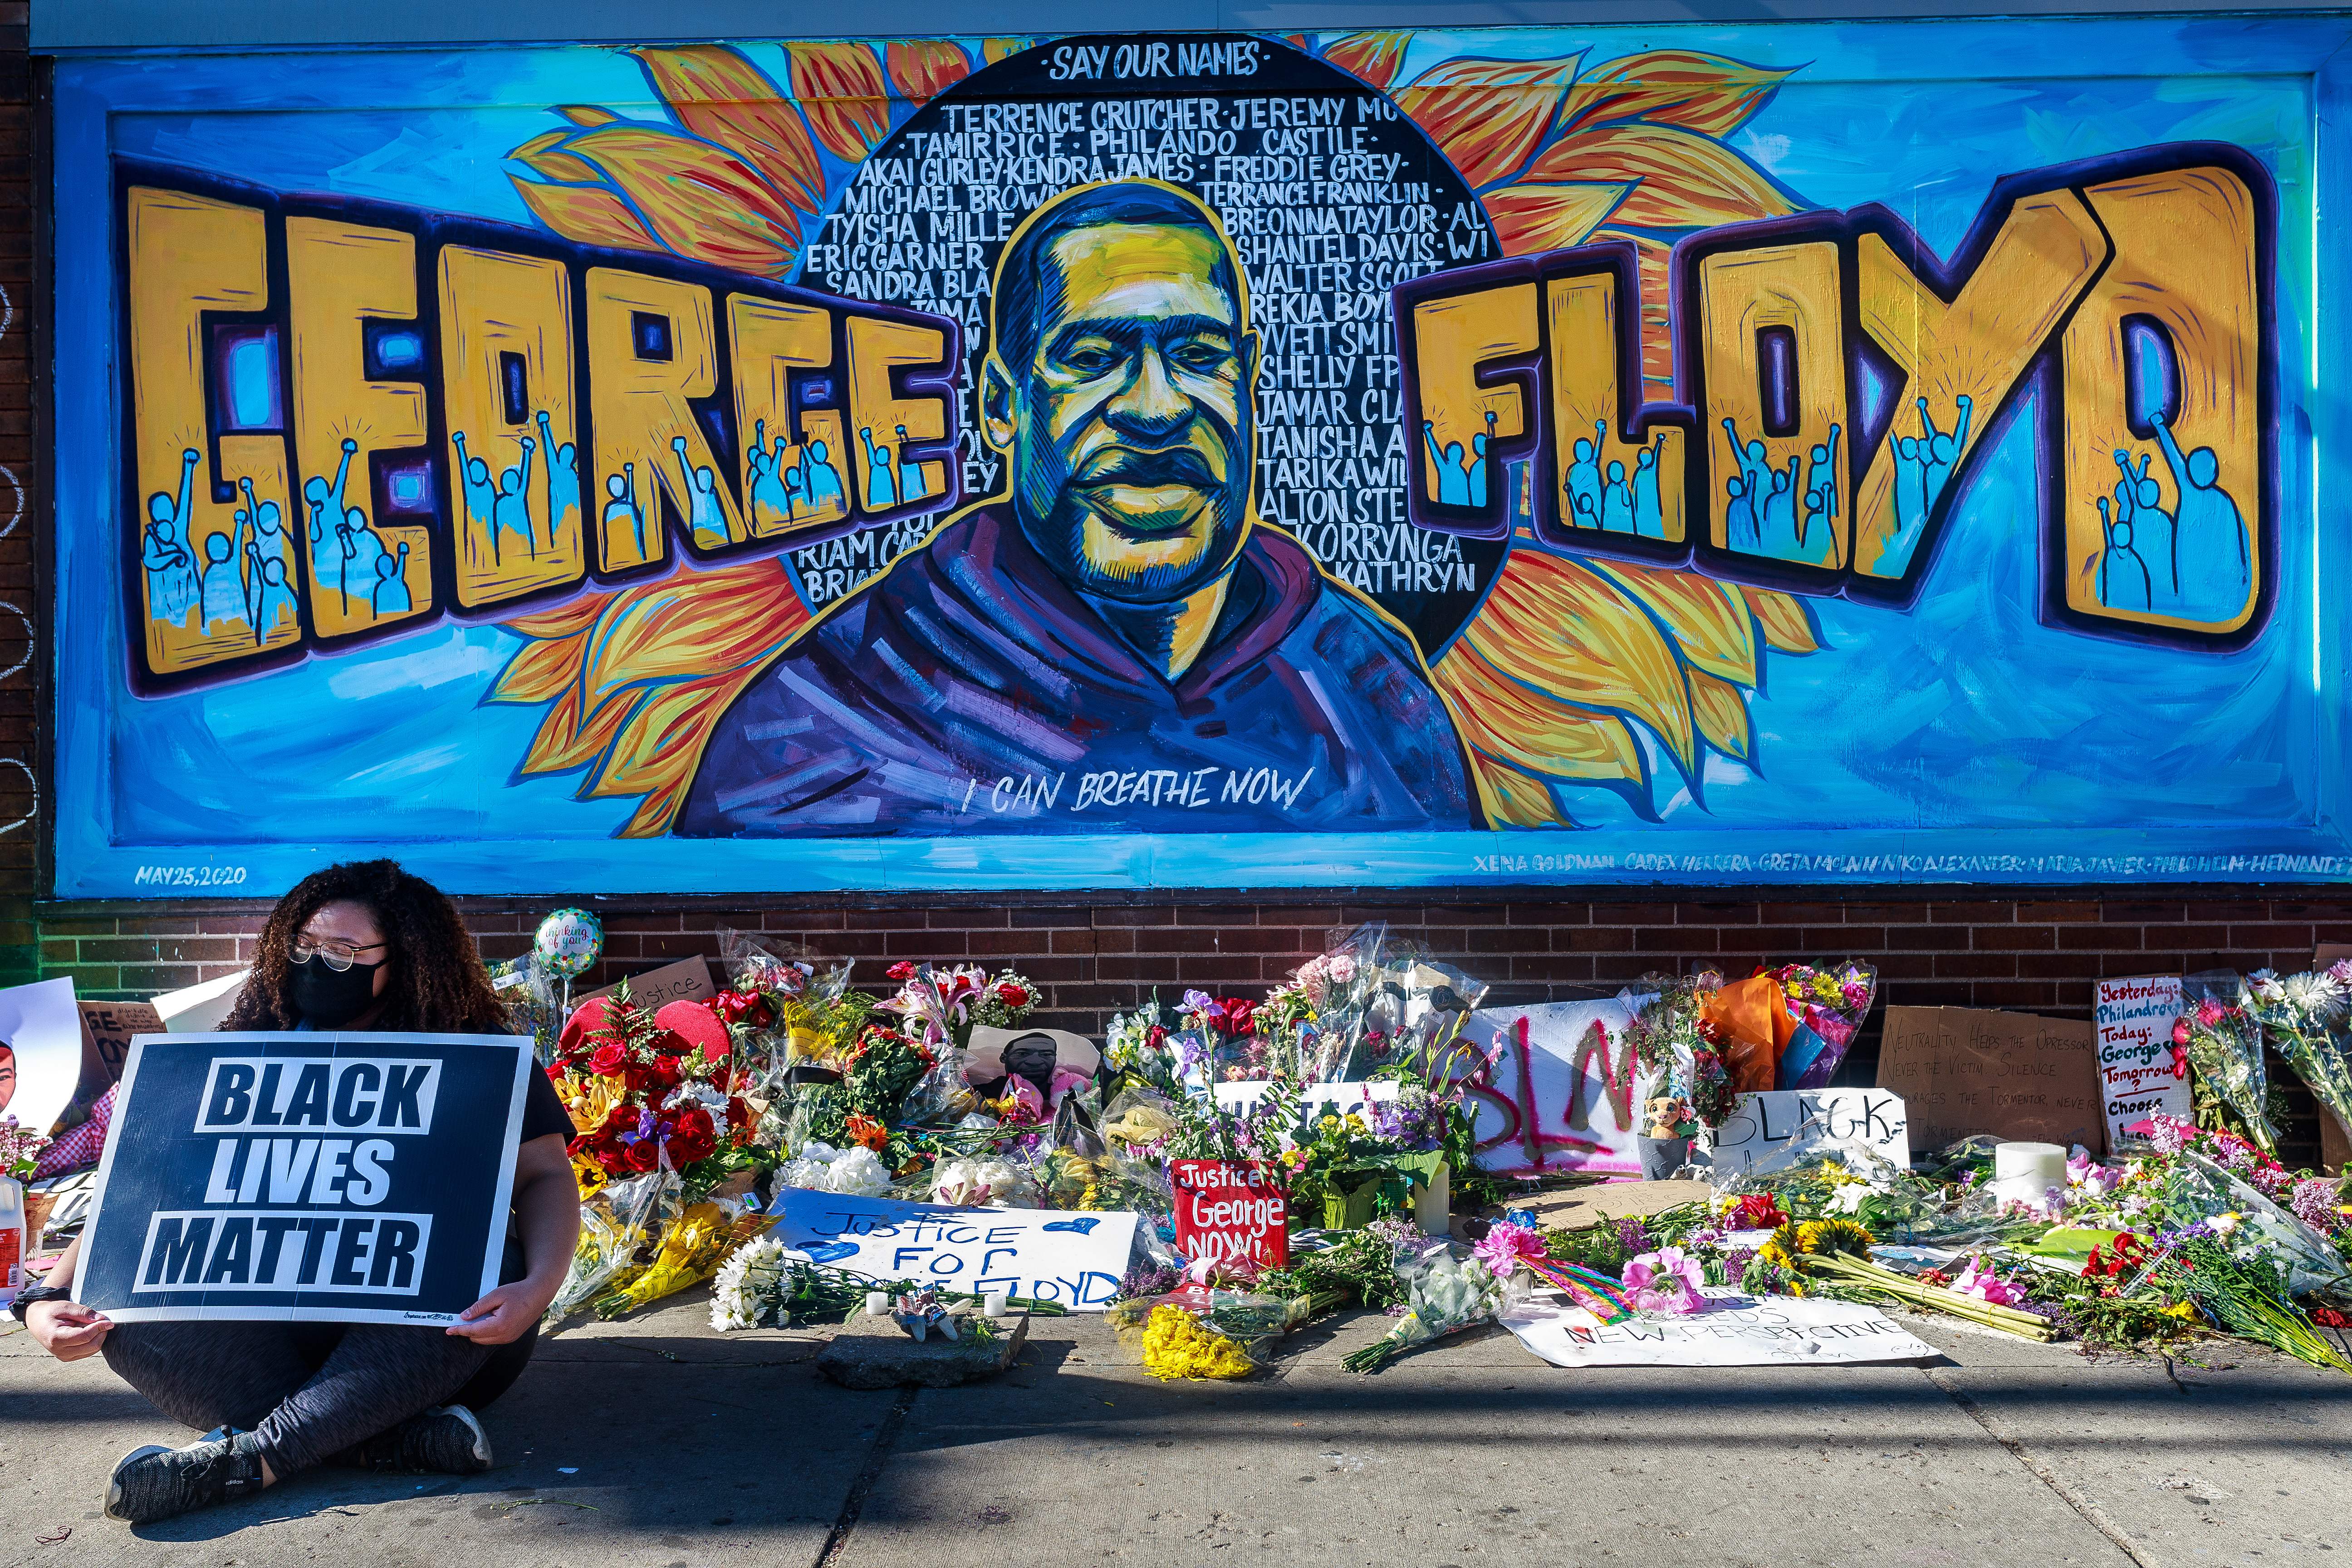 Flowers, signs and balloons are left near a makeshift memorial to George Floyd near the spot where he died while in custody of the Minneapolis police, on May 29, 2020 in Minneapolis, Minnesota. - Demonstrations are being held across the US after George Floyd died in police custody on May 25. (Photo by Kerem Yucel / AFP) (Photo by KEREM YUCEL/AFP via Getty Images)